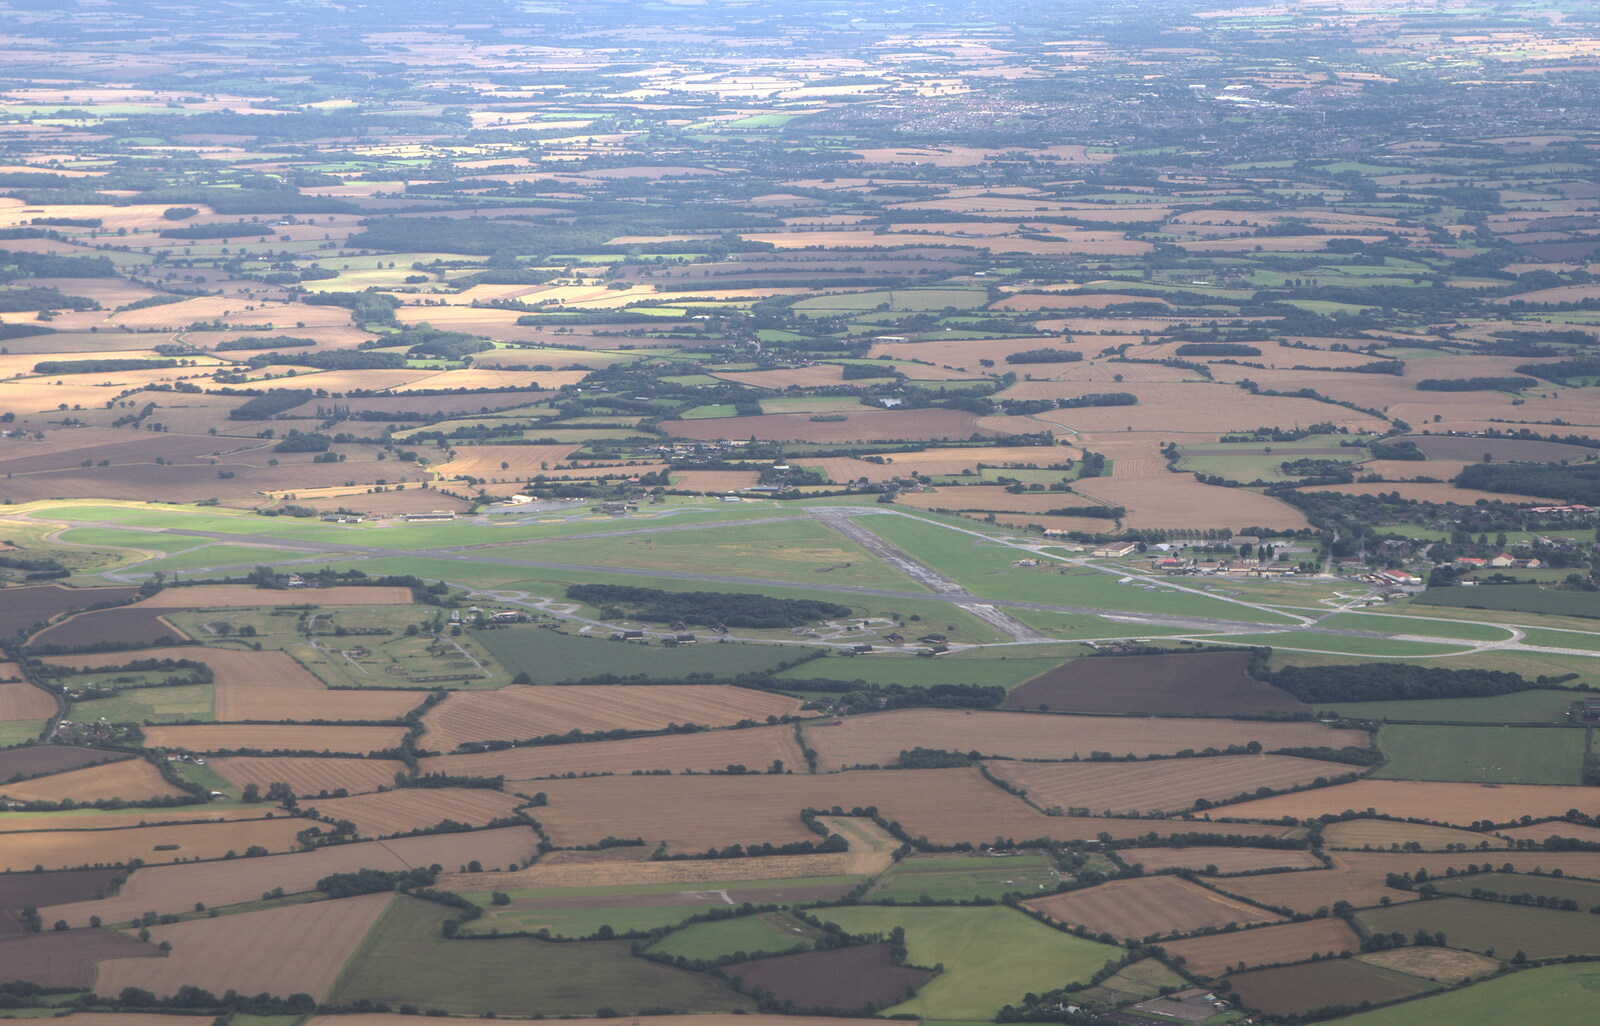 Maybe North Weald airfield from A Night Out in Dublin, County Dublin, Ireland - 9th August 2014